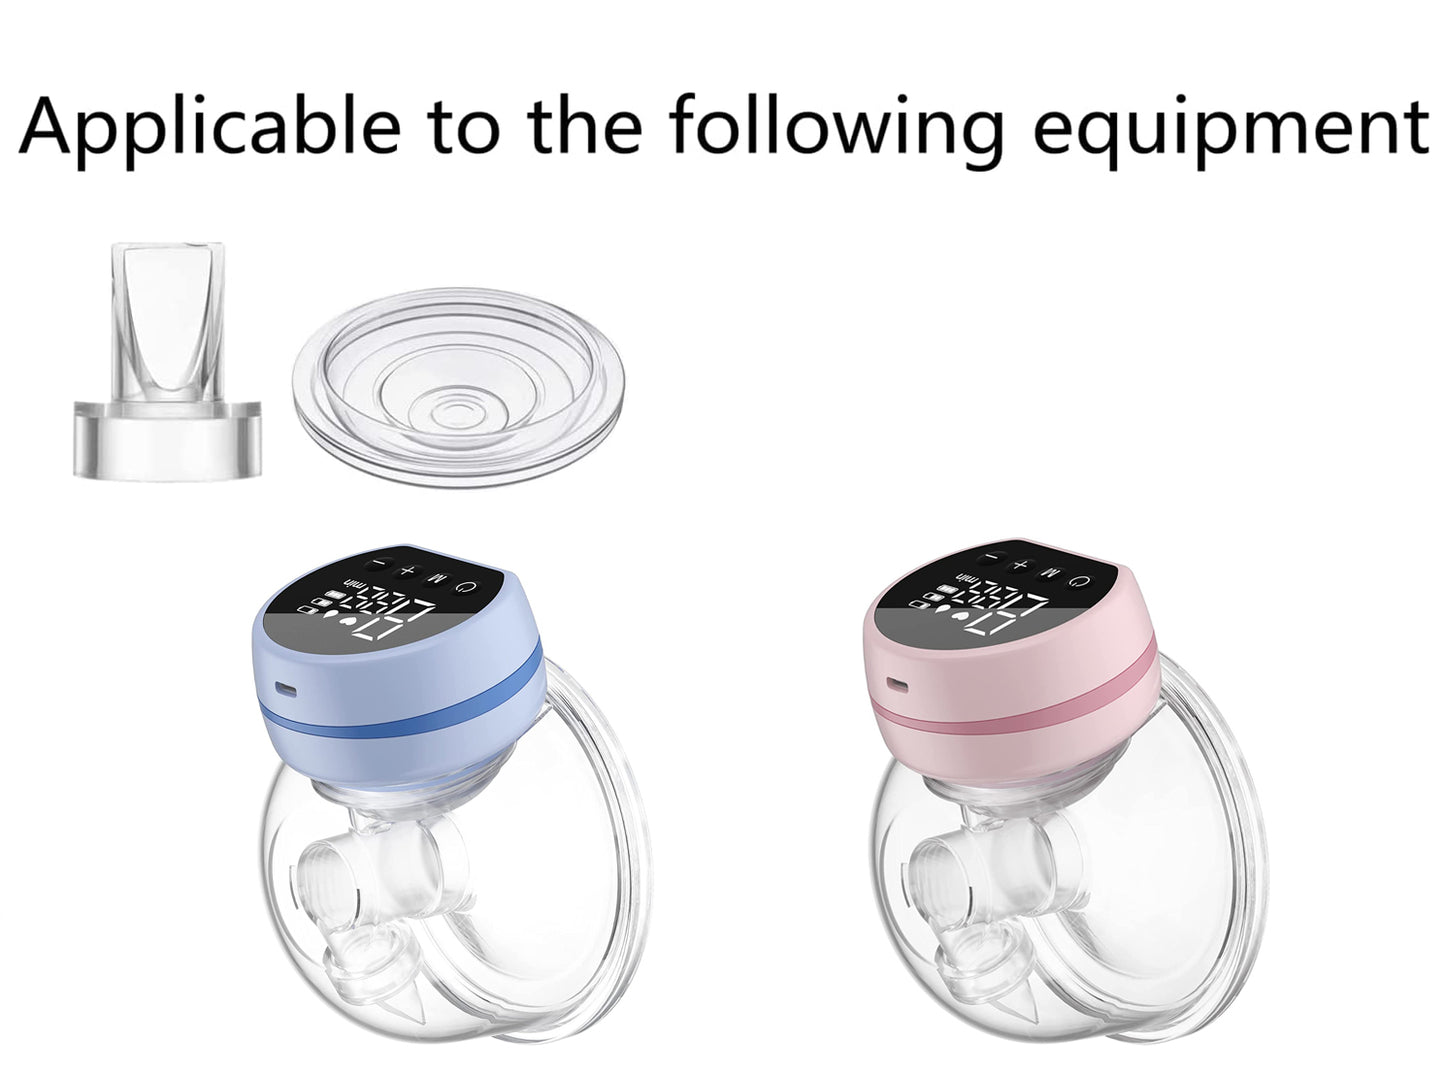 Mamomy Valves & Silicone Diaphragm for MZ-610/611,Wearable Breast Pump Universal Duckbill Valve and Silicone Diaphragm Accessories